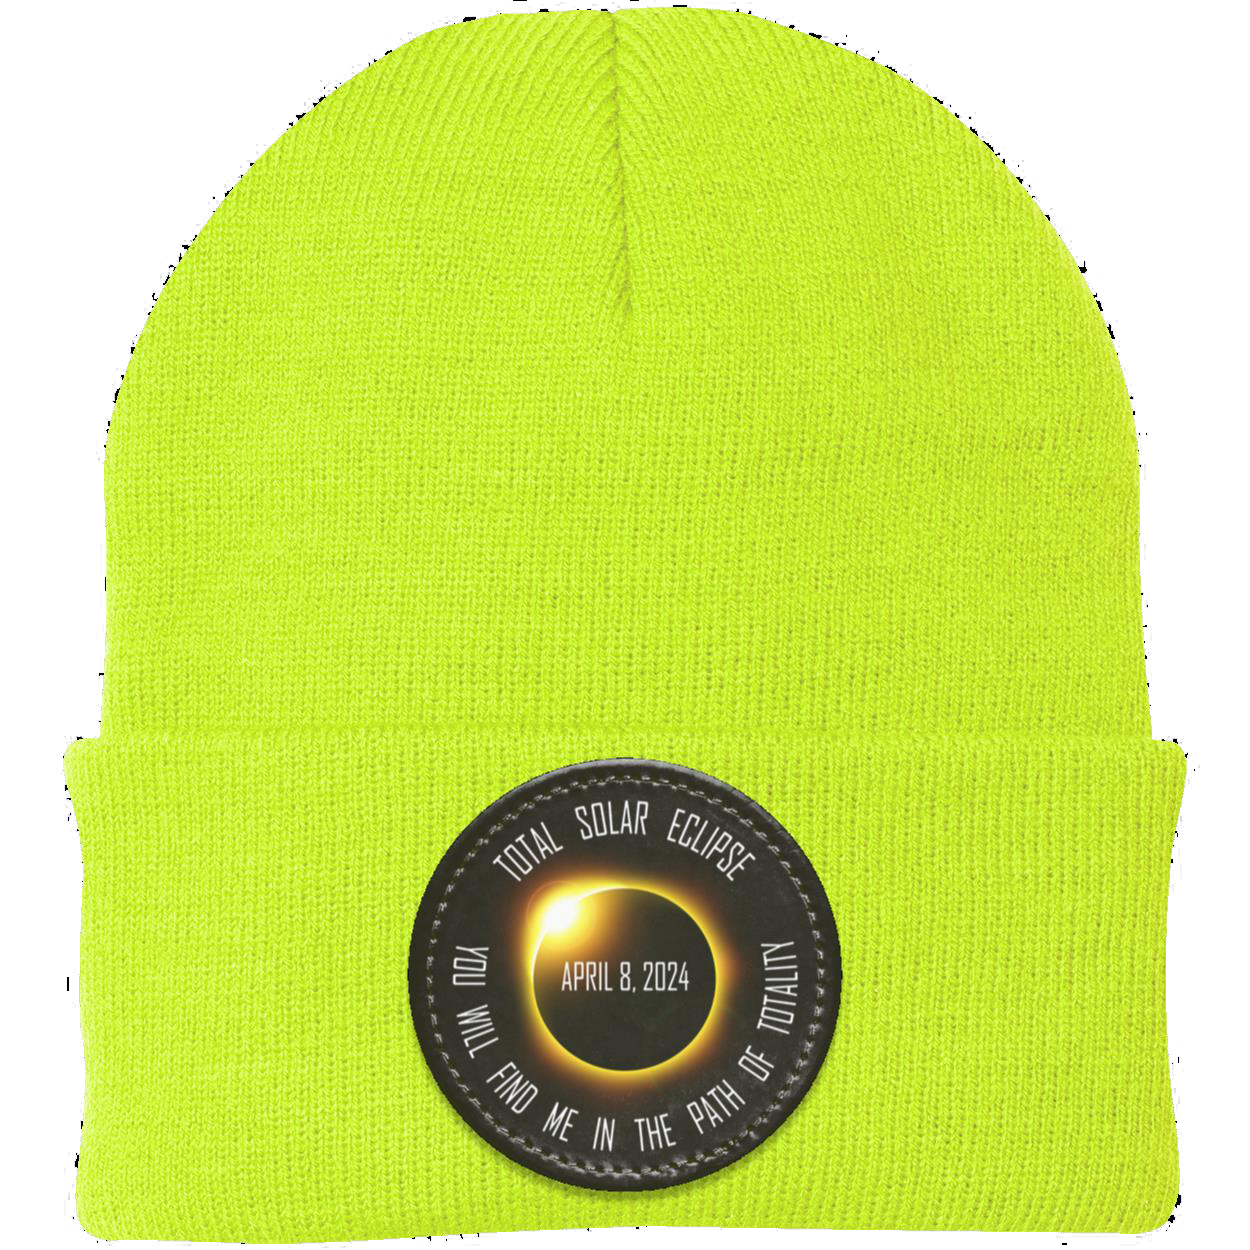 Total Solar Eclipse April 8 2024, You Will Find Me in the Path of Totality, 2024 Eclipse beanie Knit Cap - Patch